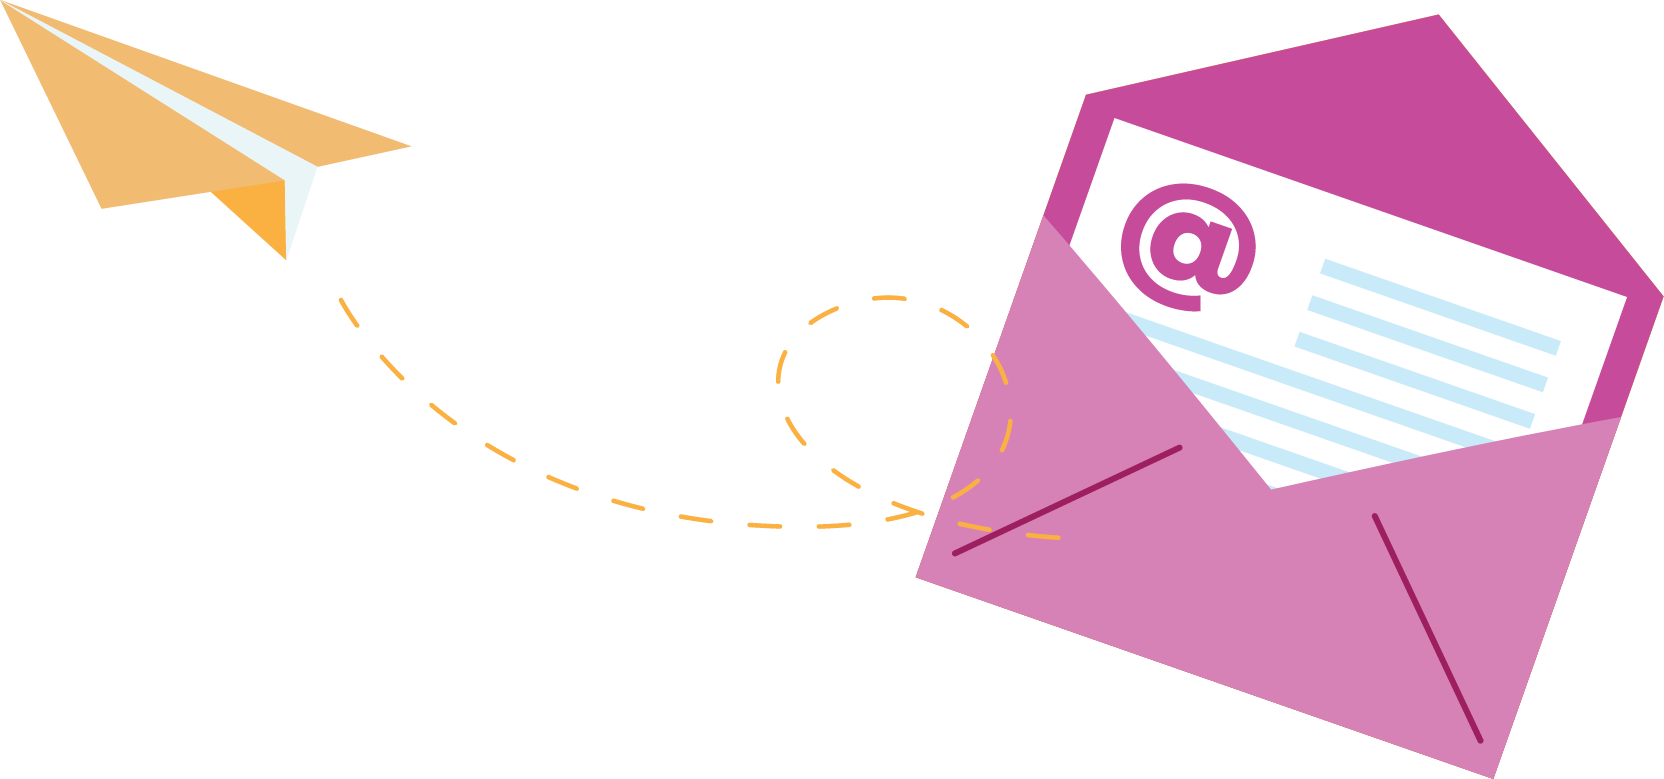 Illustration of a paper plane and letter